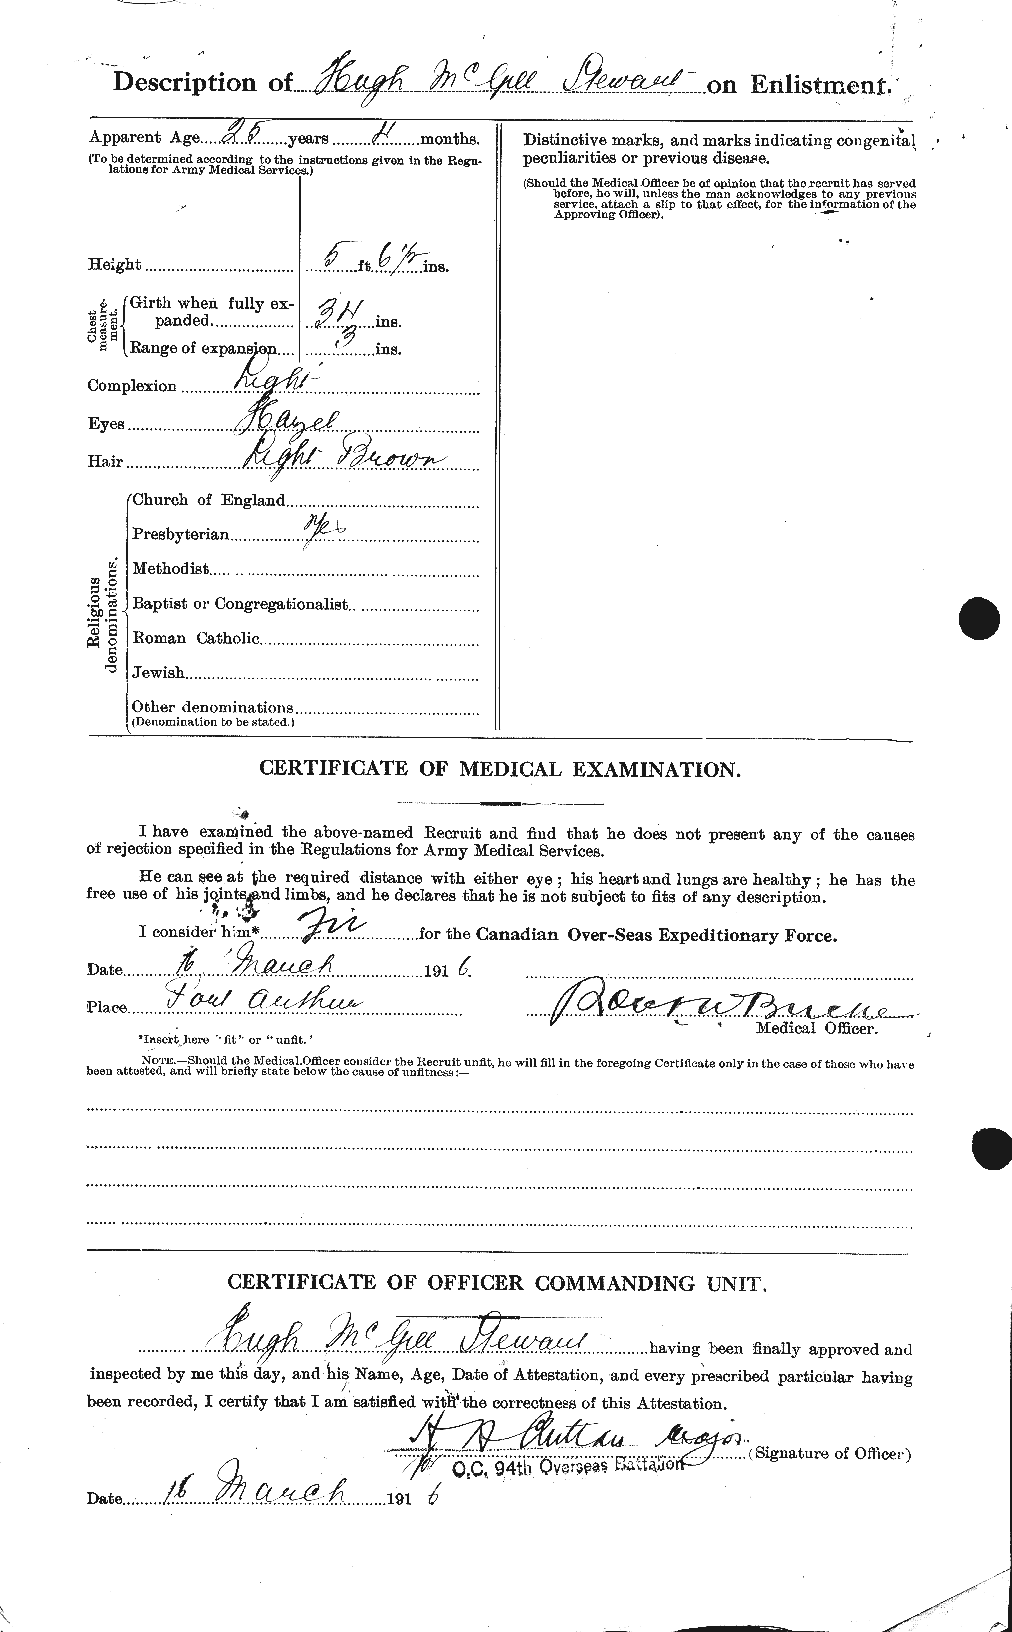 Personnel Records of the First World War - CEF 623368b